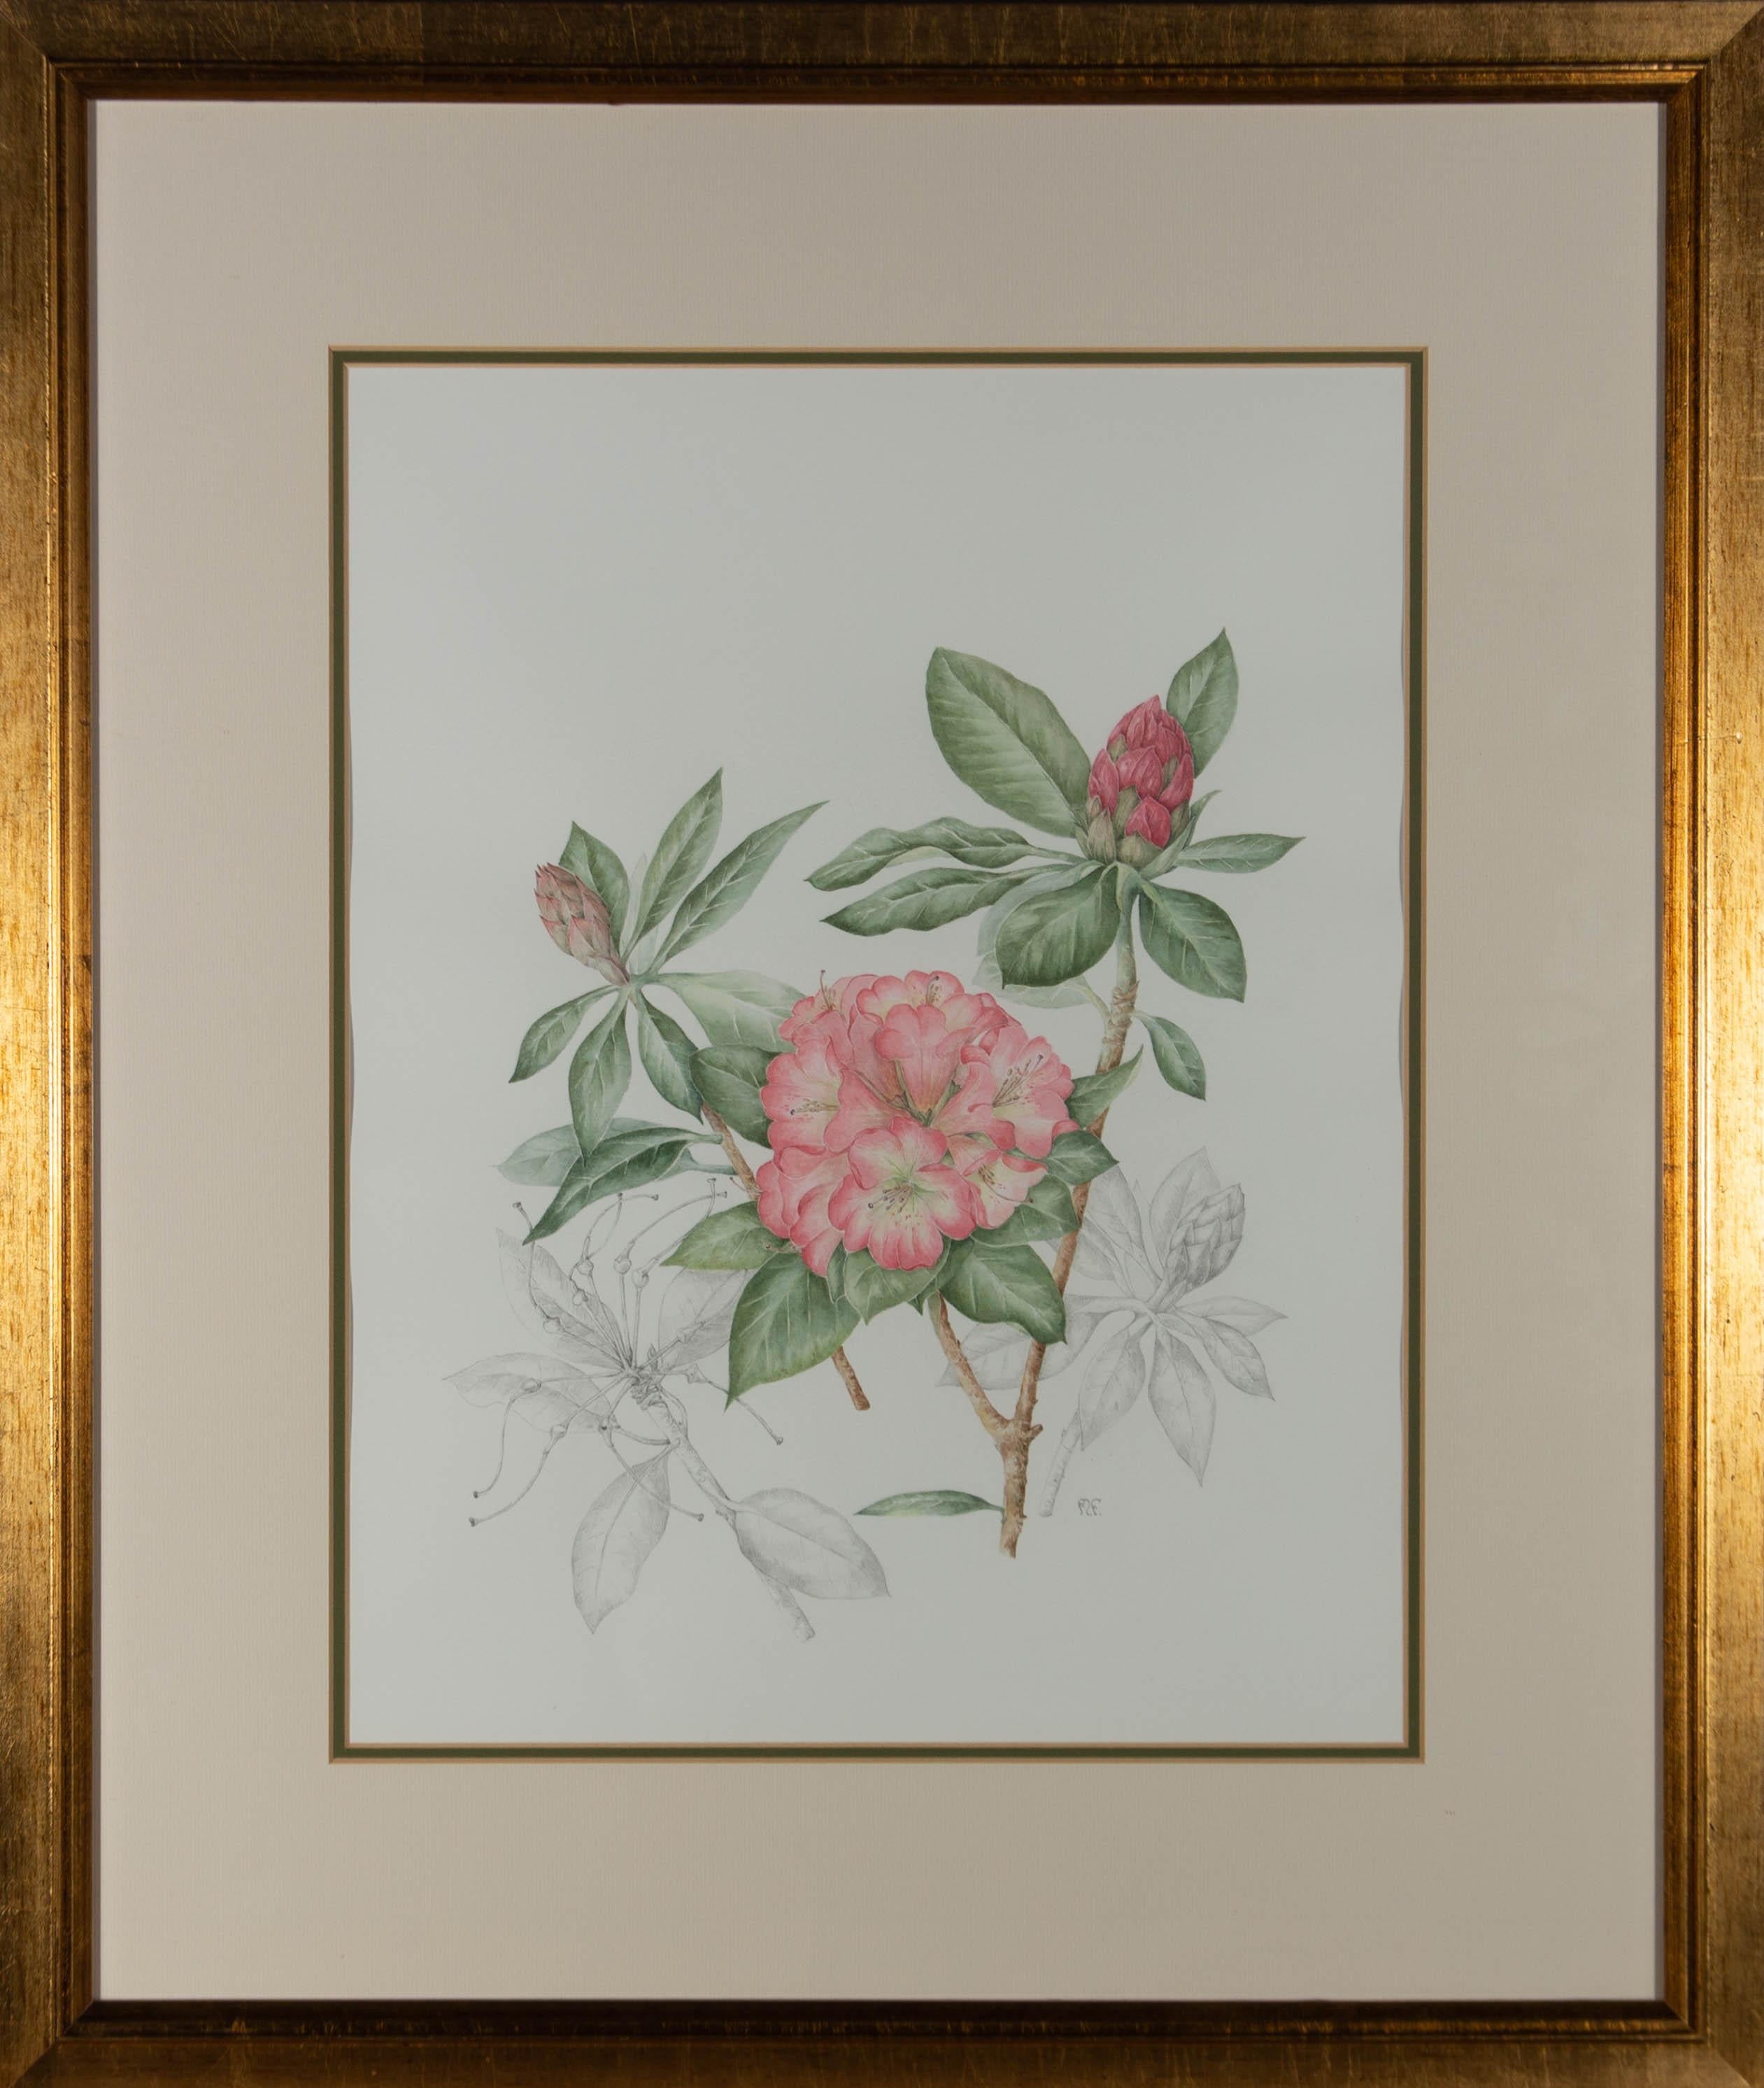 A delicate watercolour study of pink Rhododendrons which has been intertwined with similar graphite studies of the flower in its earlier stages. It has been presented in a double card mount and gilt effect frame. Initialled by the artist in the